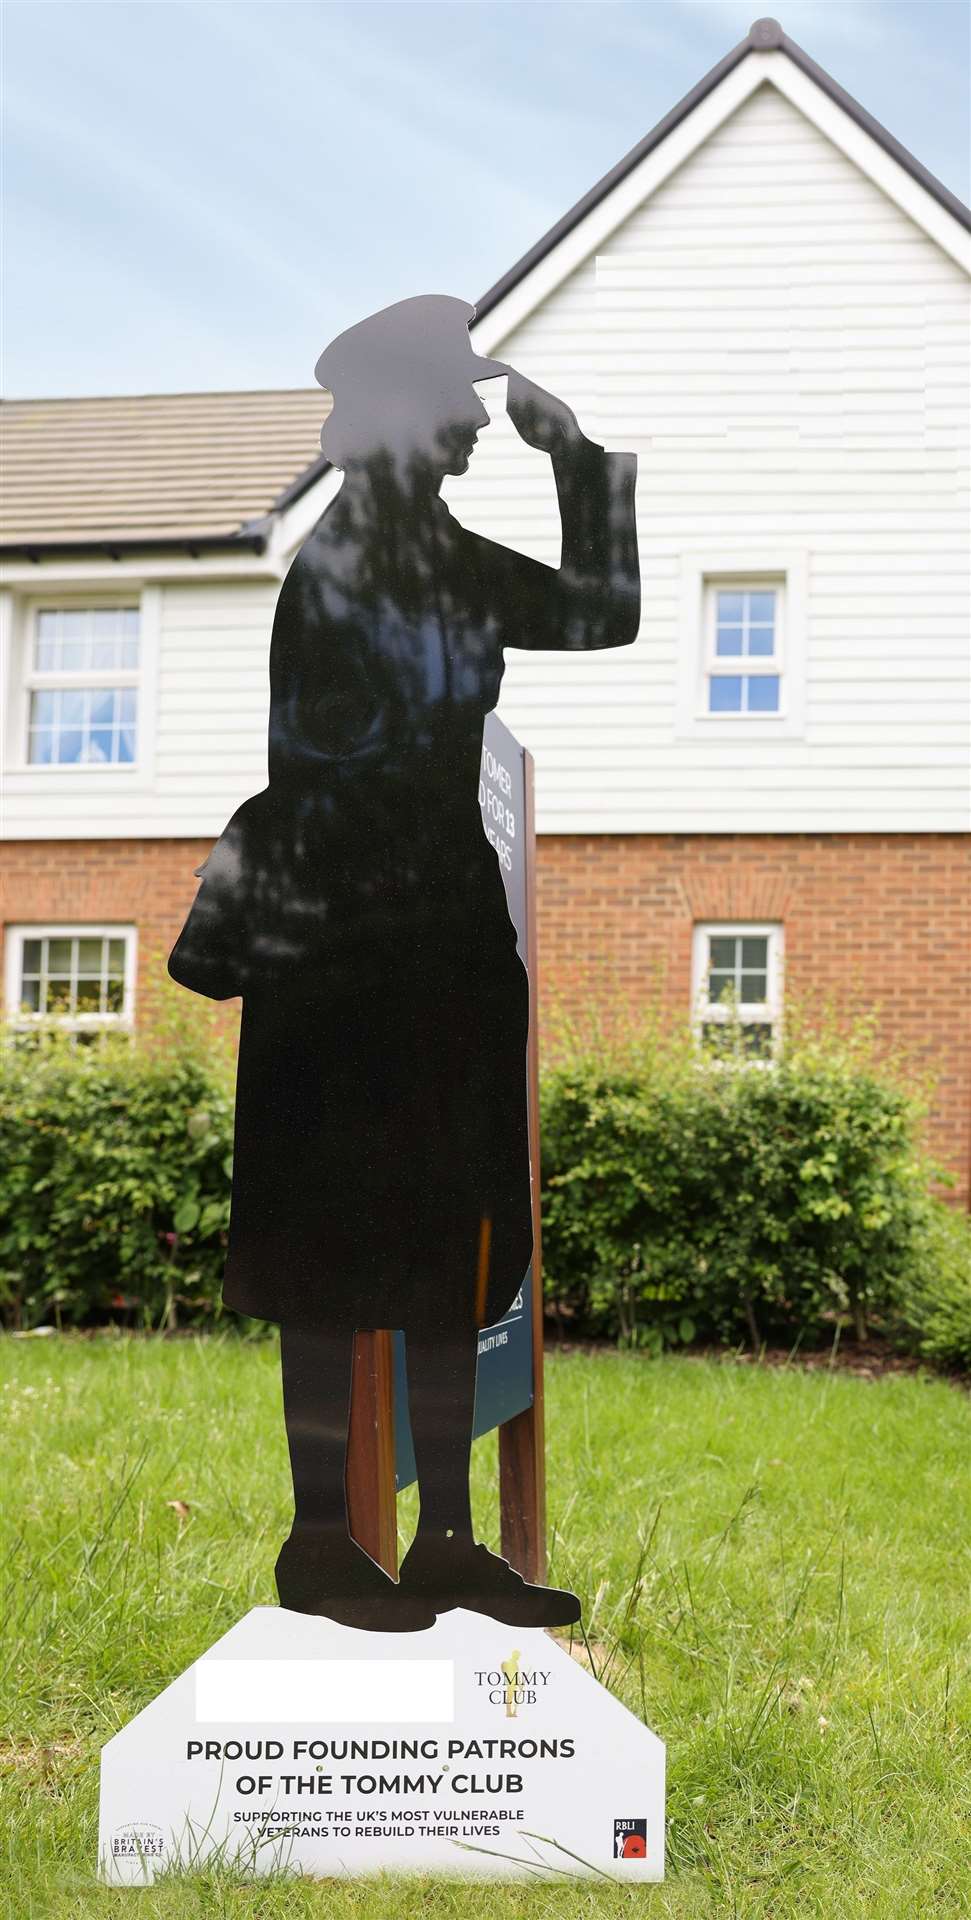 The new Unknown Women in War silhouette,at Whitfield. Picture: Barratt Homes